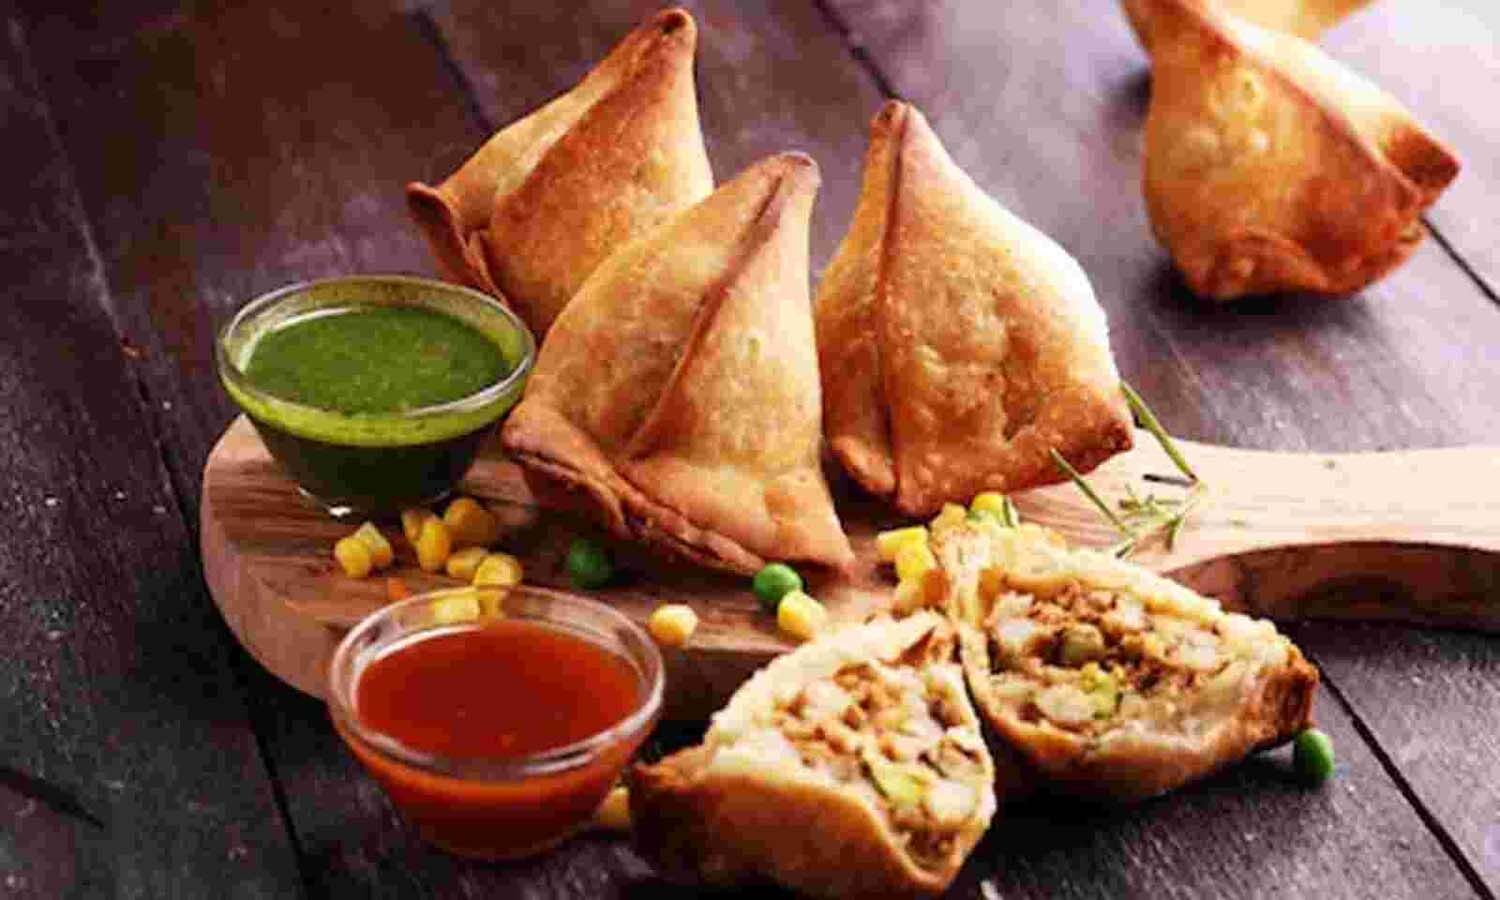 Samosa Is National Snack: Samosa is the national snack, does not differentiate between rich and poor